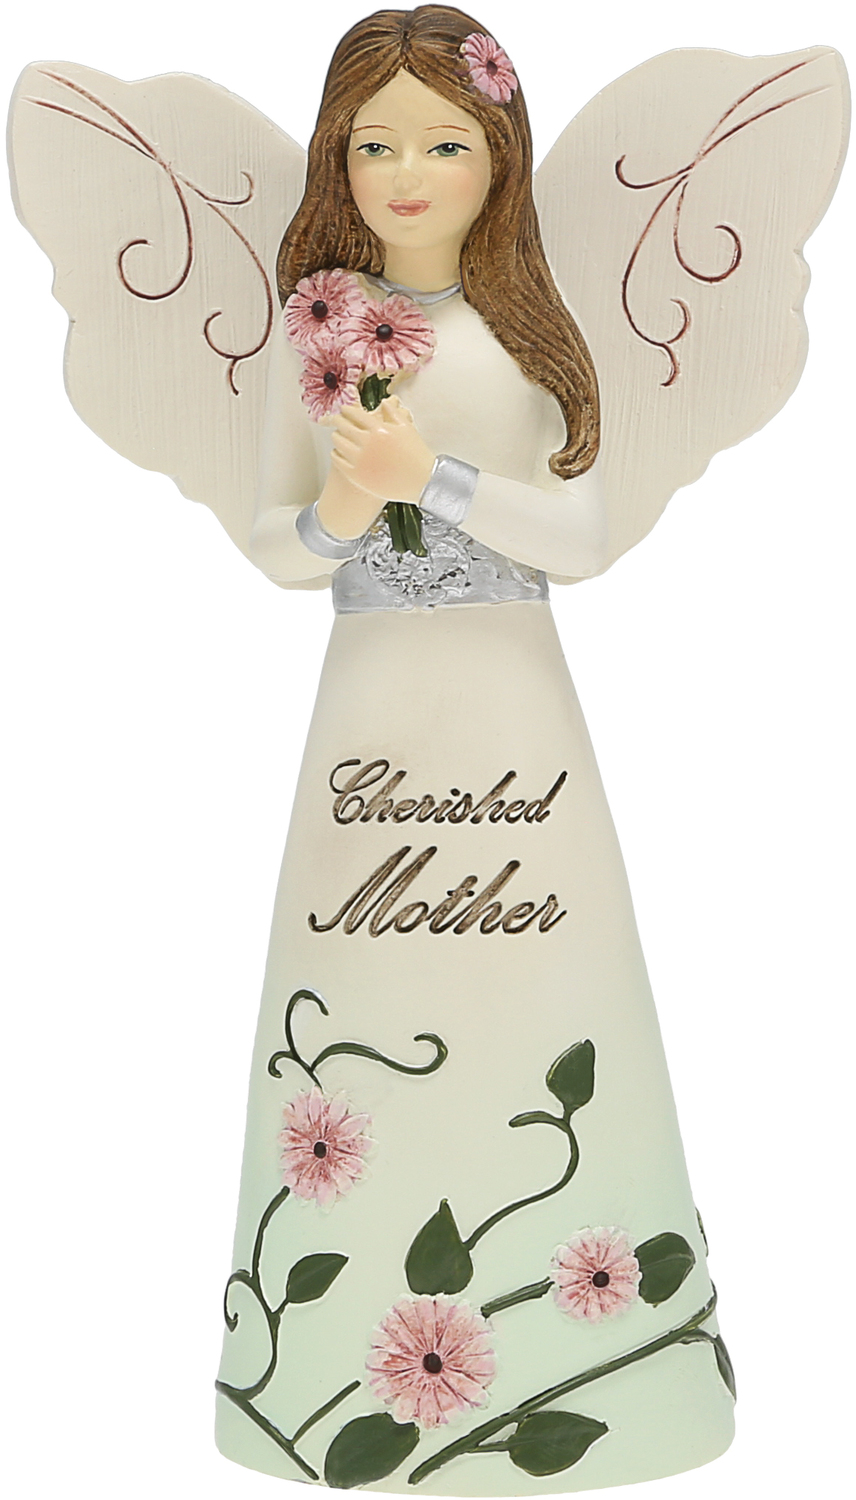  Mother by Elements -  Mother - 5" Angel Holding Daisies